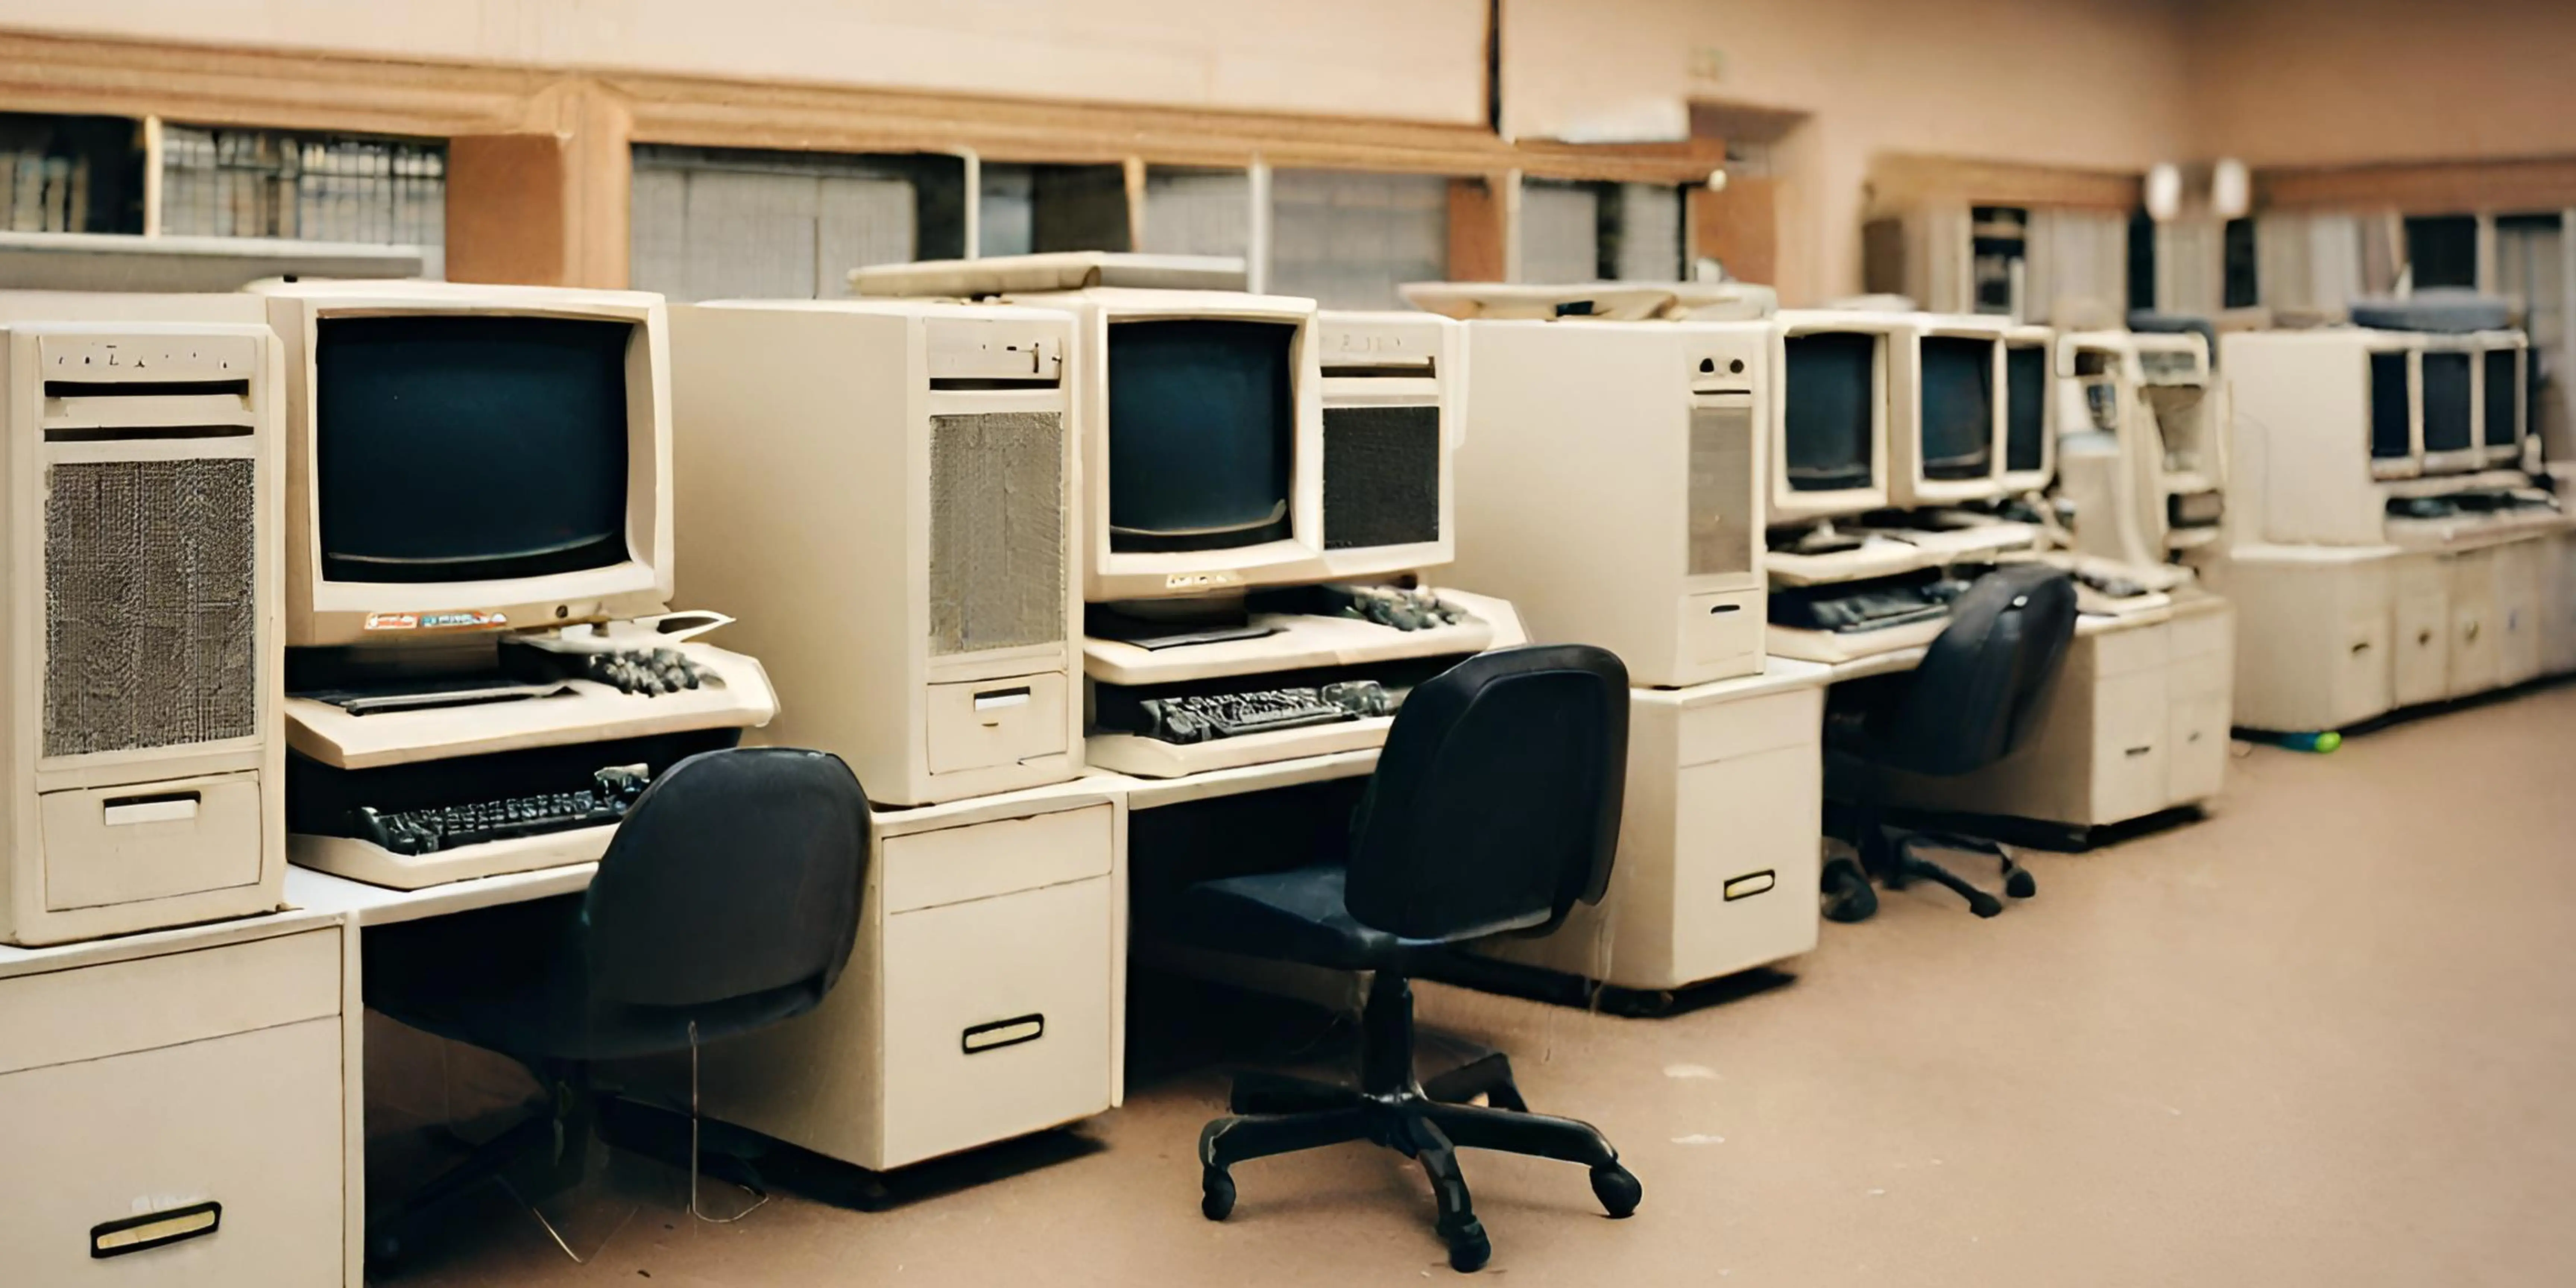 Traditional computer labs